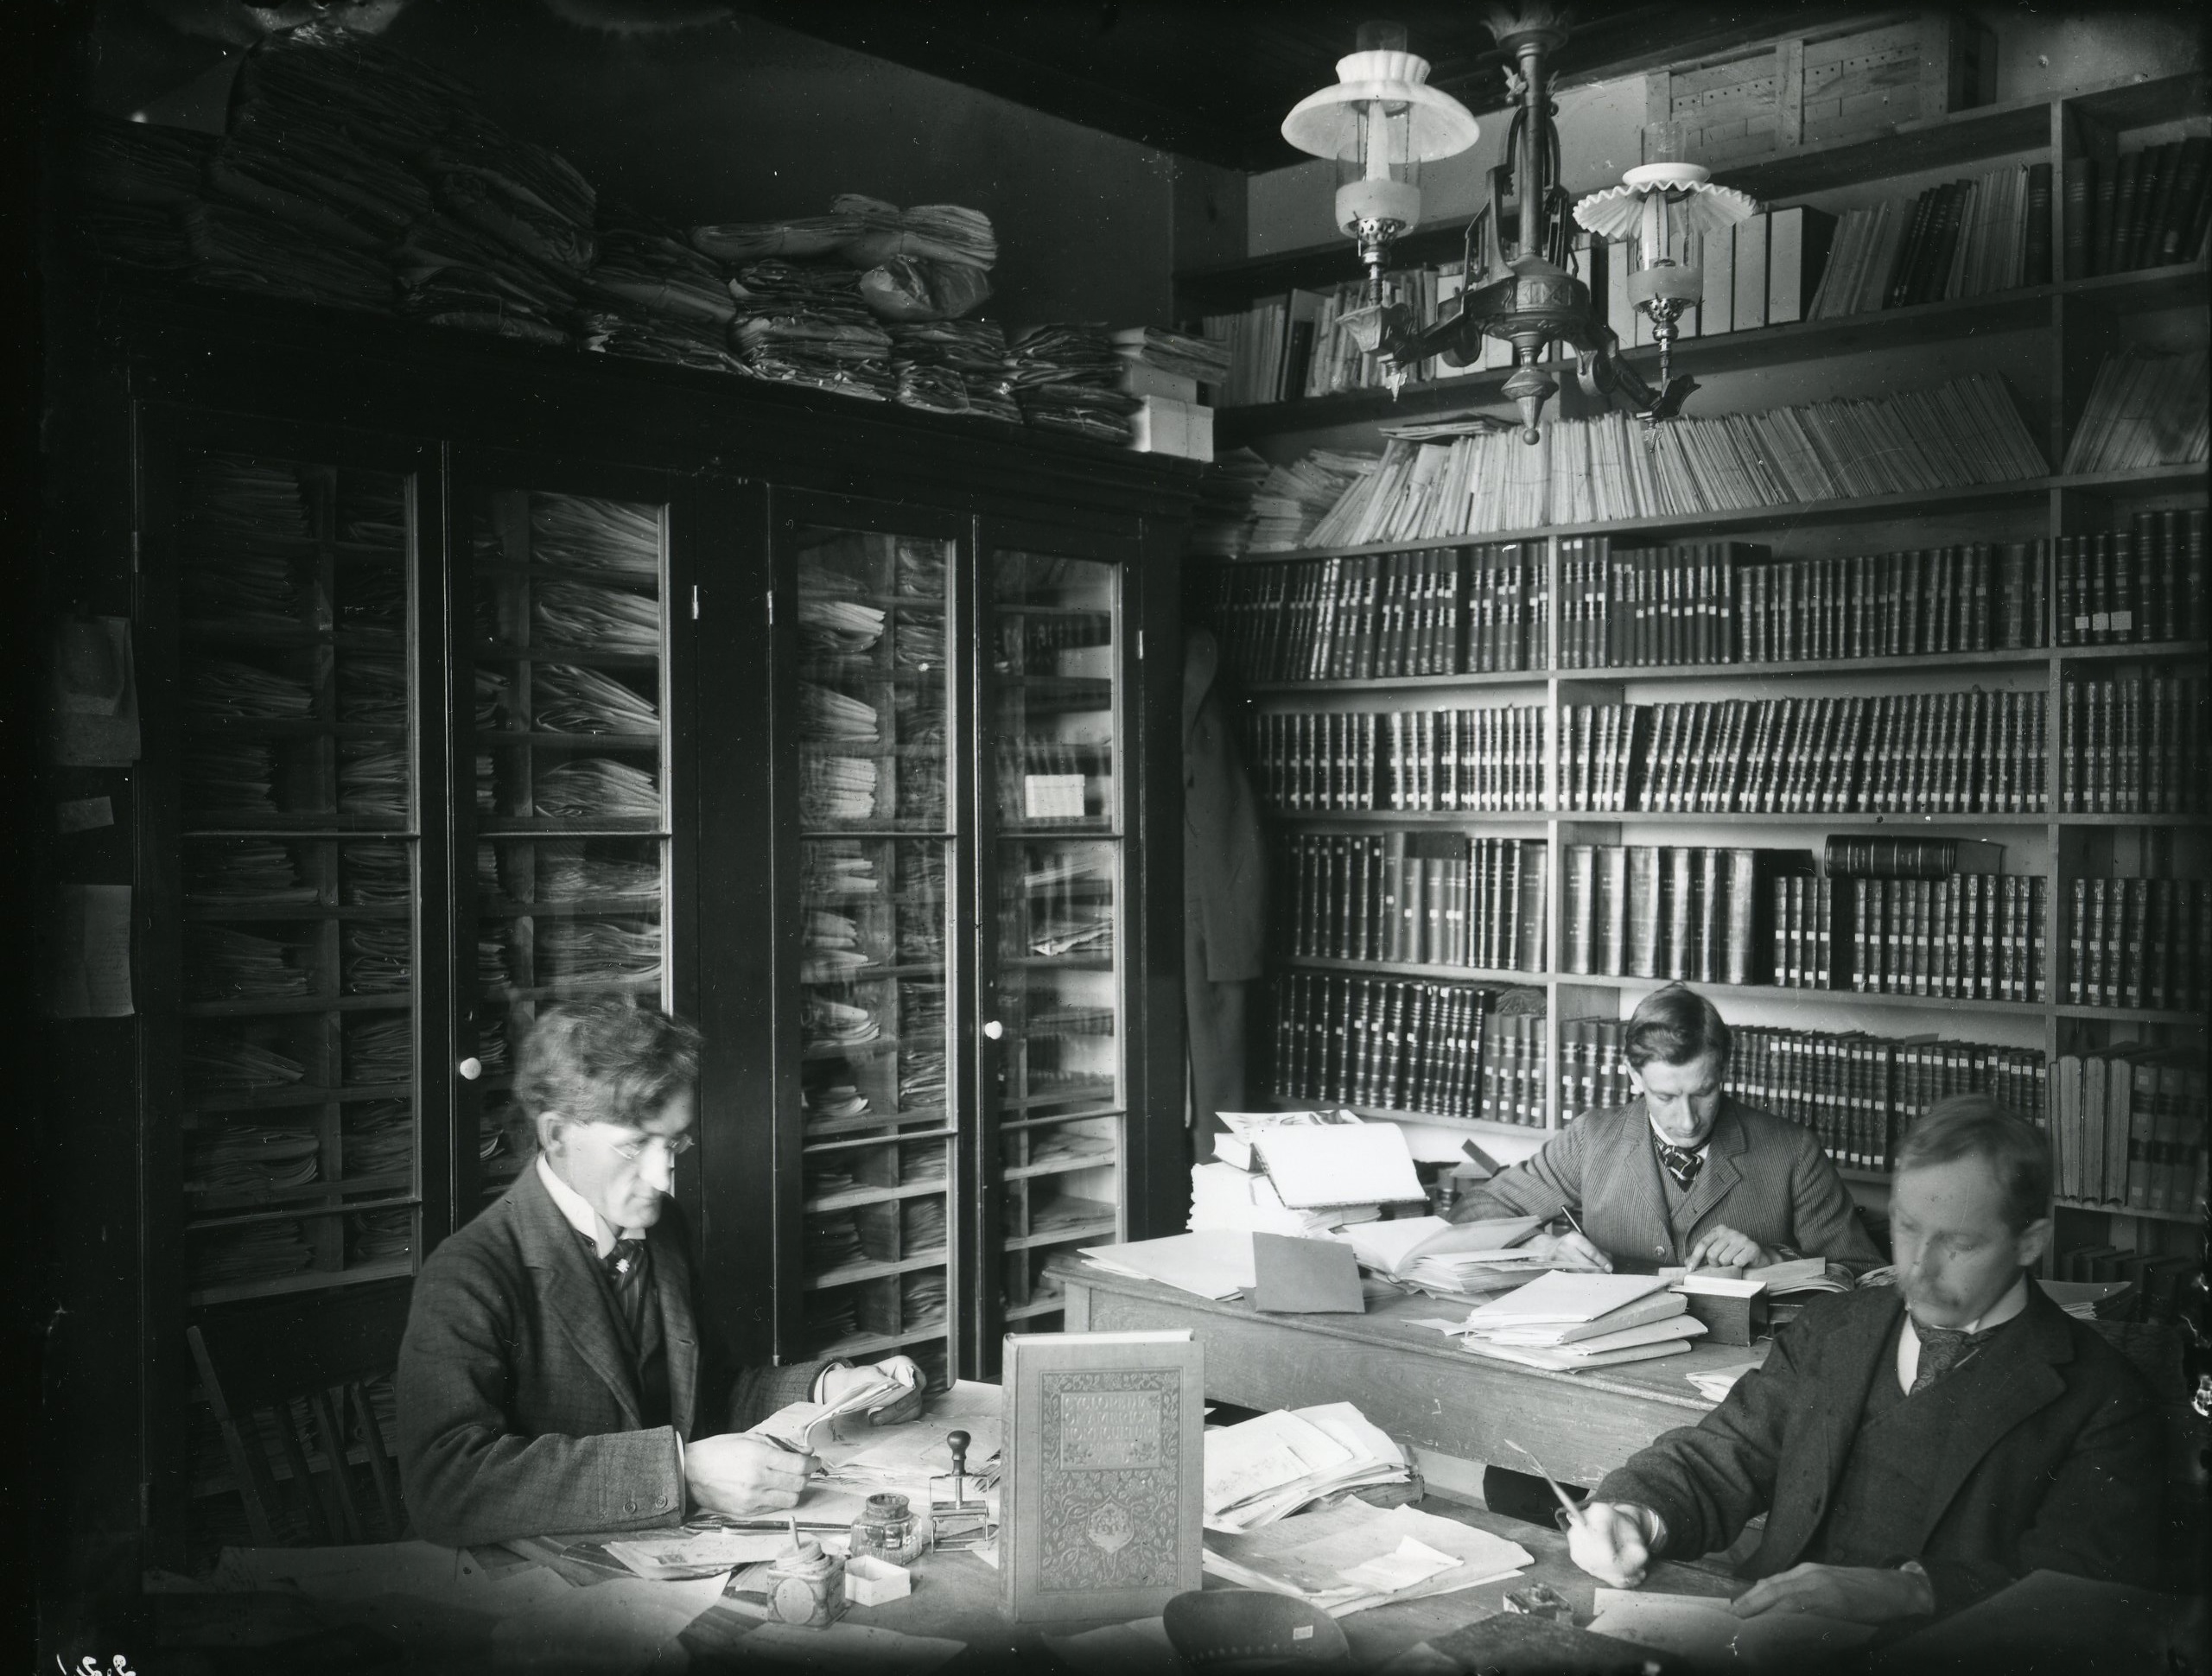 A rectangular black and white image of men at tables surrounded by books.